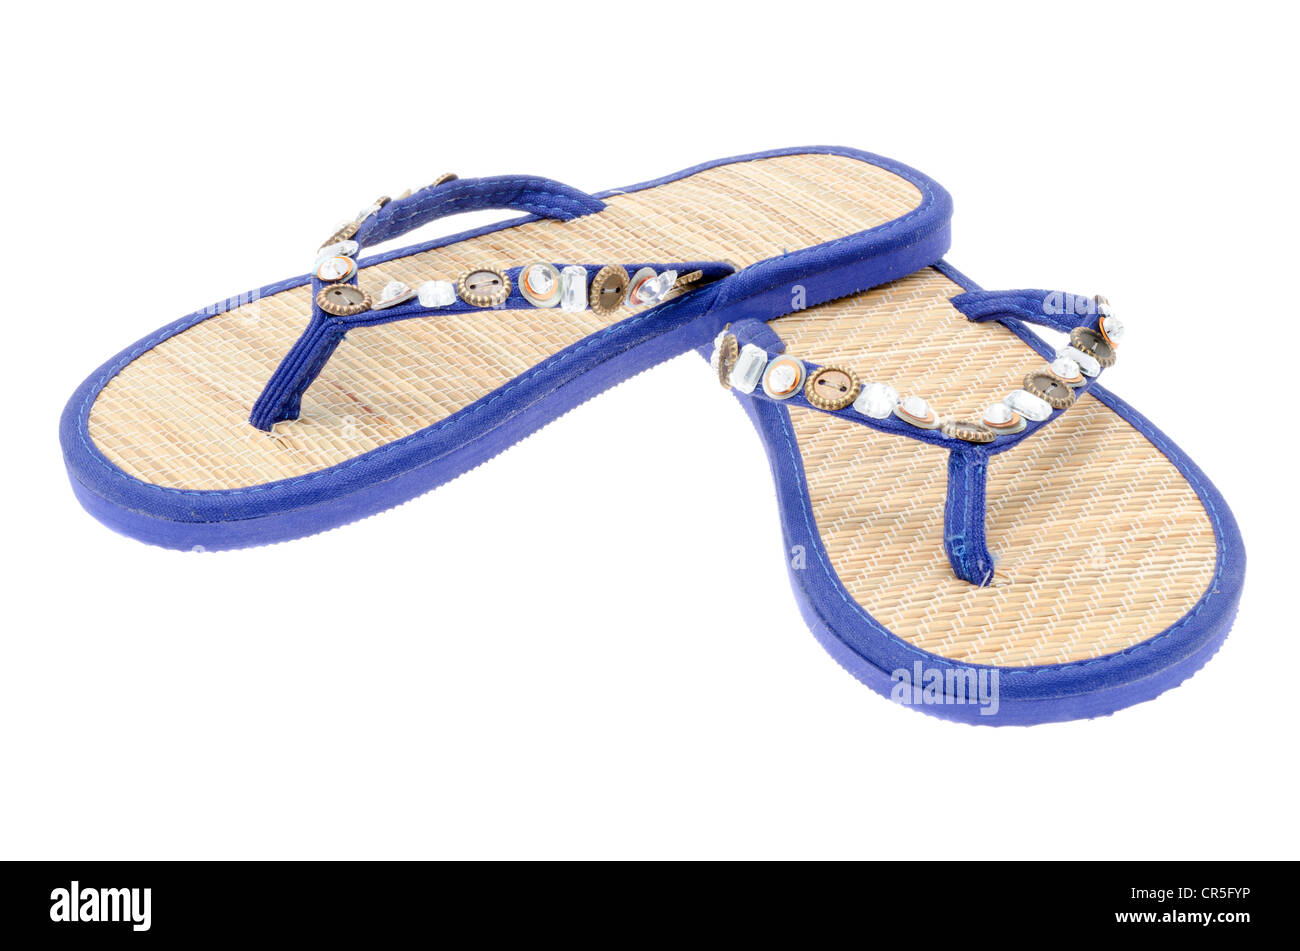 A pair of ladies flip-flop summer sandals - image taken in the studio with a white background Stock Photo